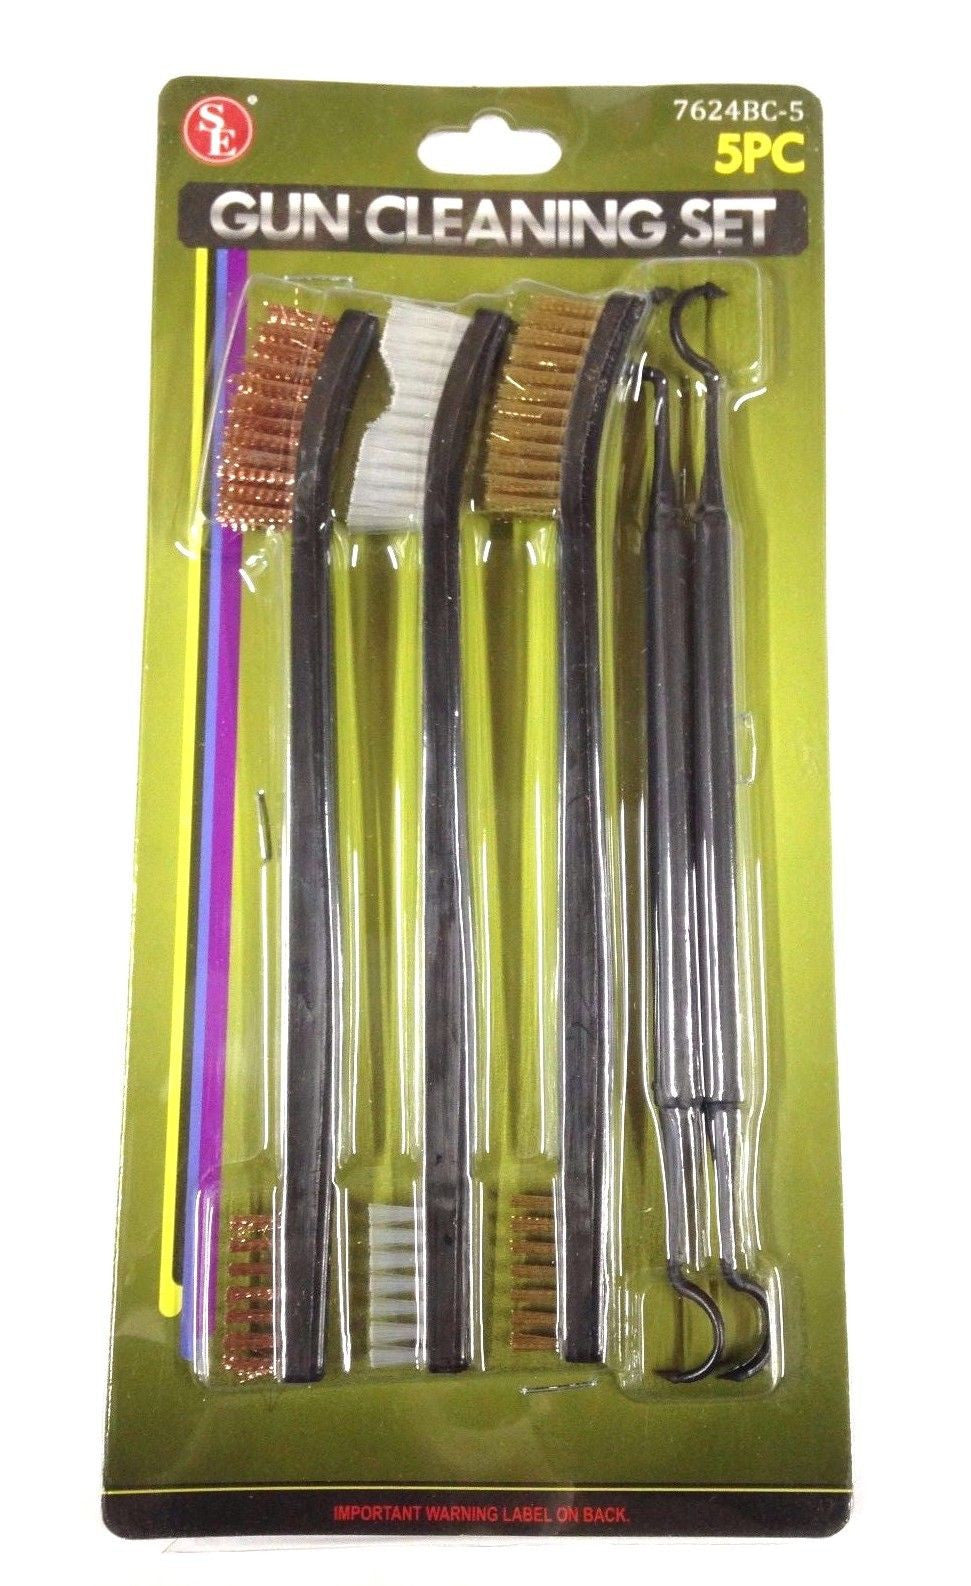 SE 7624BC-5 Gun Cleaning Set with 3 Brushes & 2 Double-Ended Picks (5PC Total)